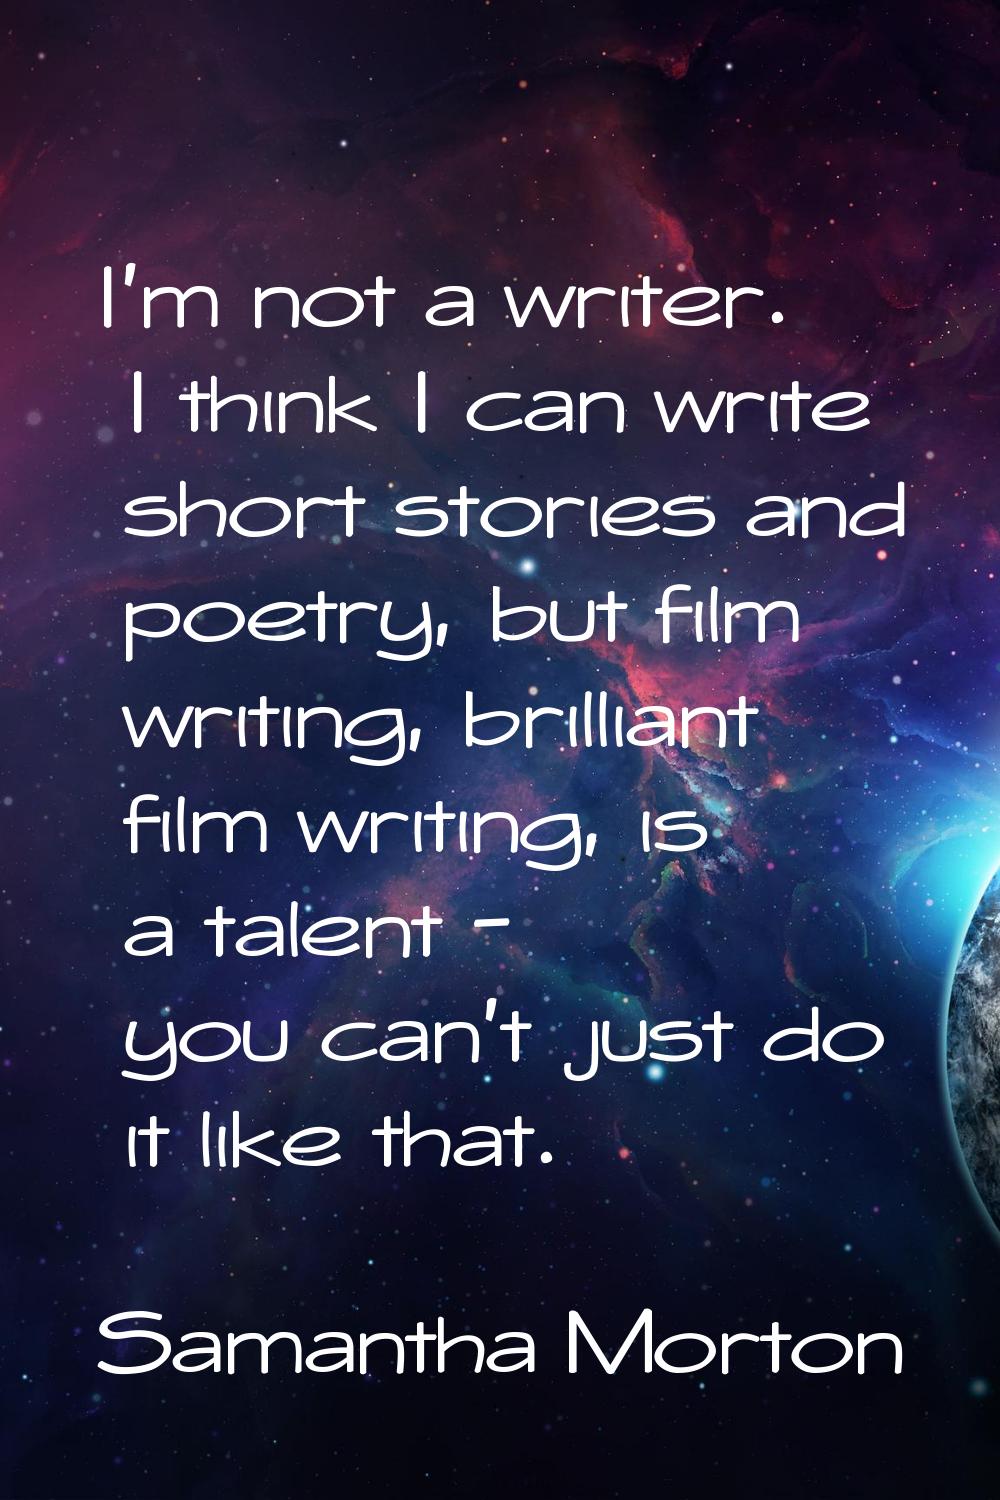 I'm not a writer. I think I can write short stories and poetry, but film writing, brilliant film wr